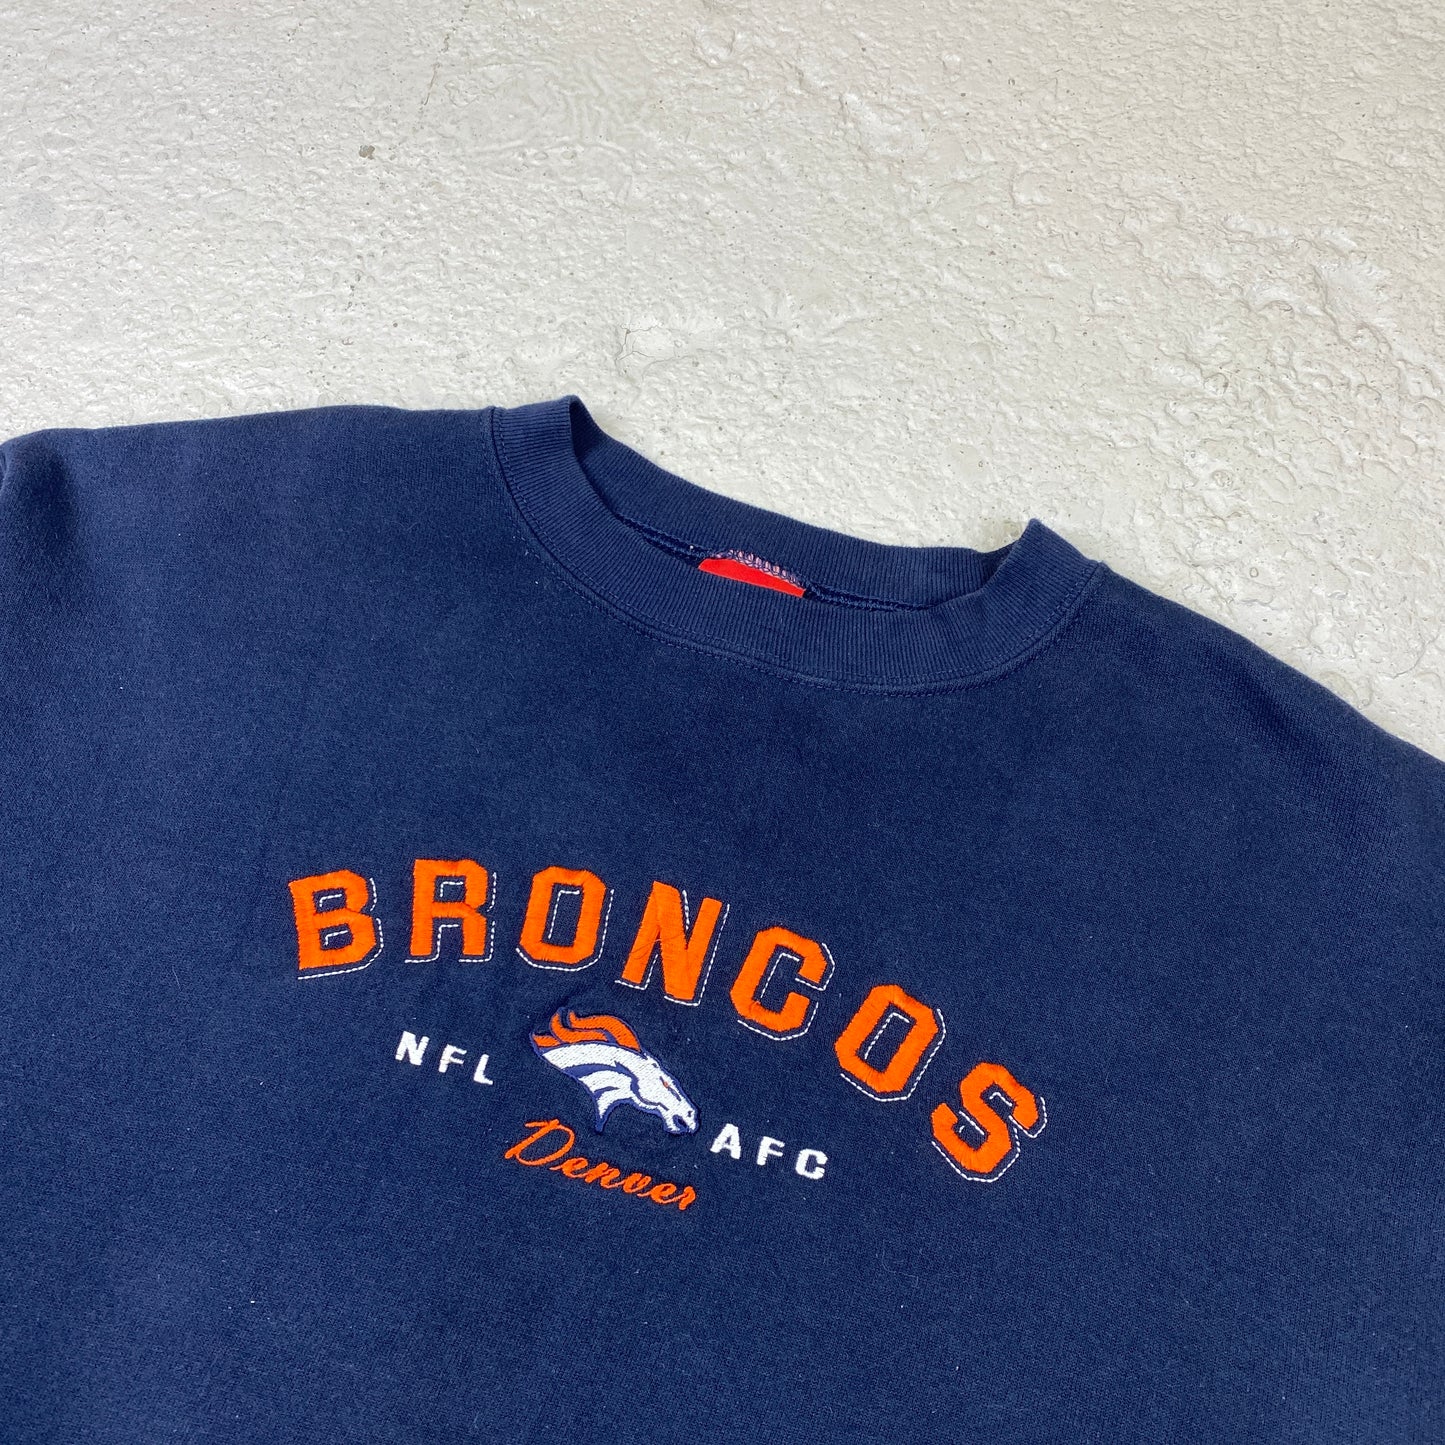 Denver Broncos heavyweight embroidered sweater (L)